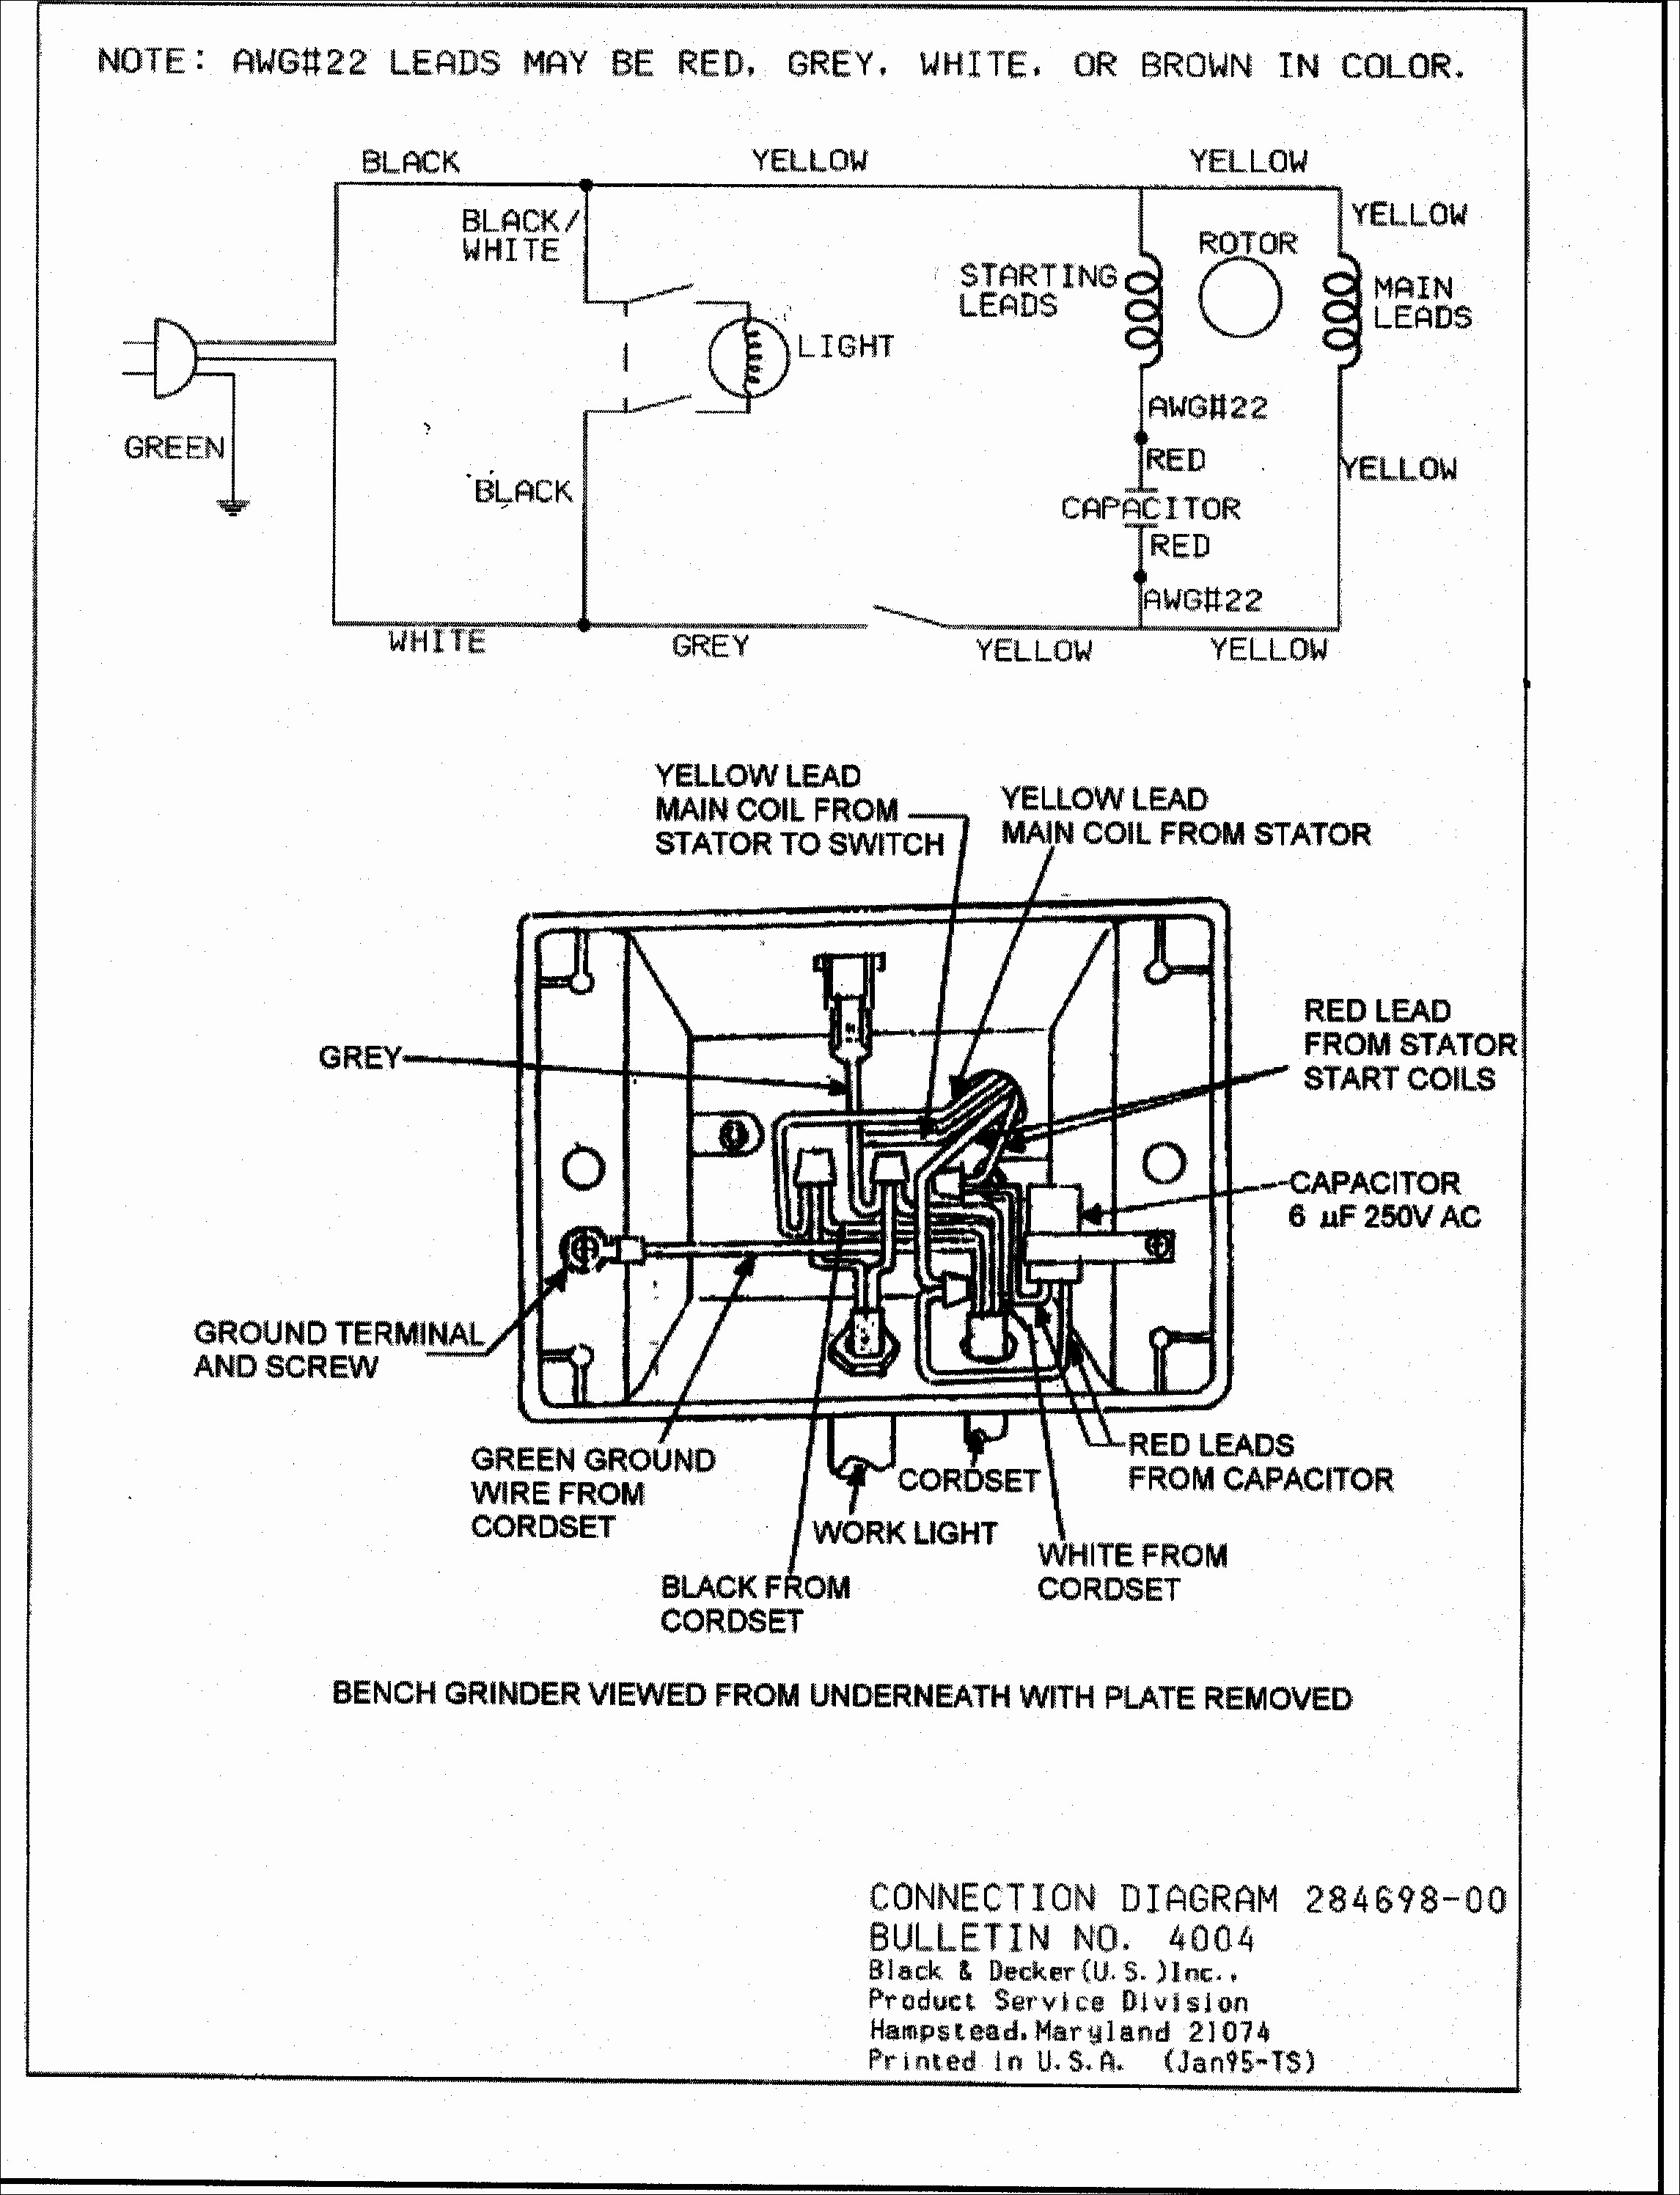 Points and Condenser Wiring Diagram Inspirational Funky Rheem Condenser Wiring Diagram Vignette Electrical Diagram